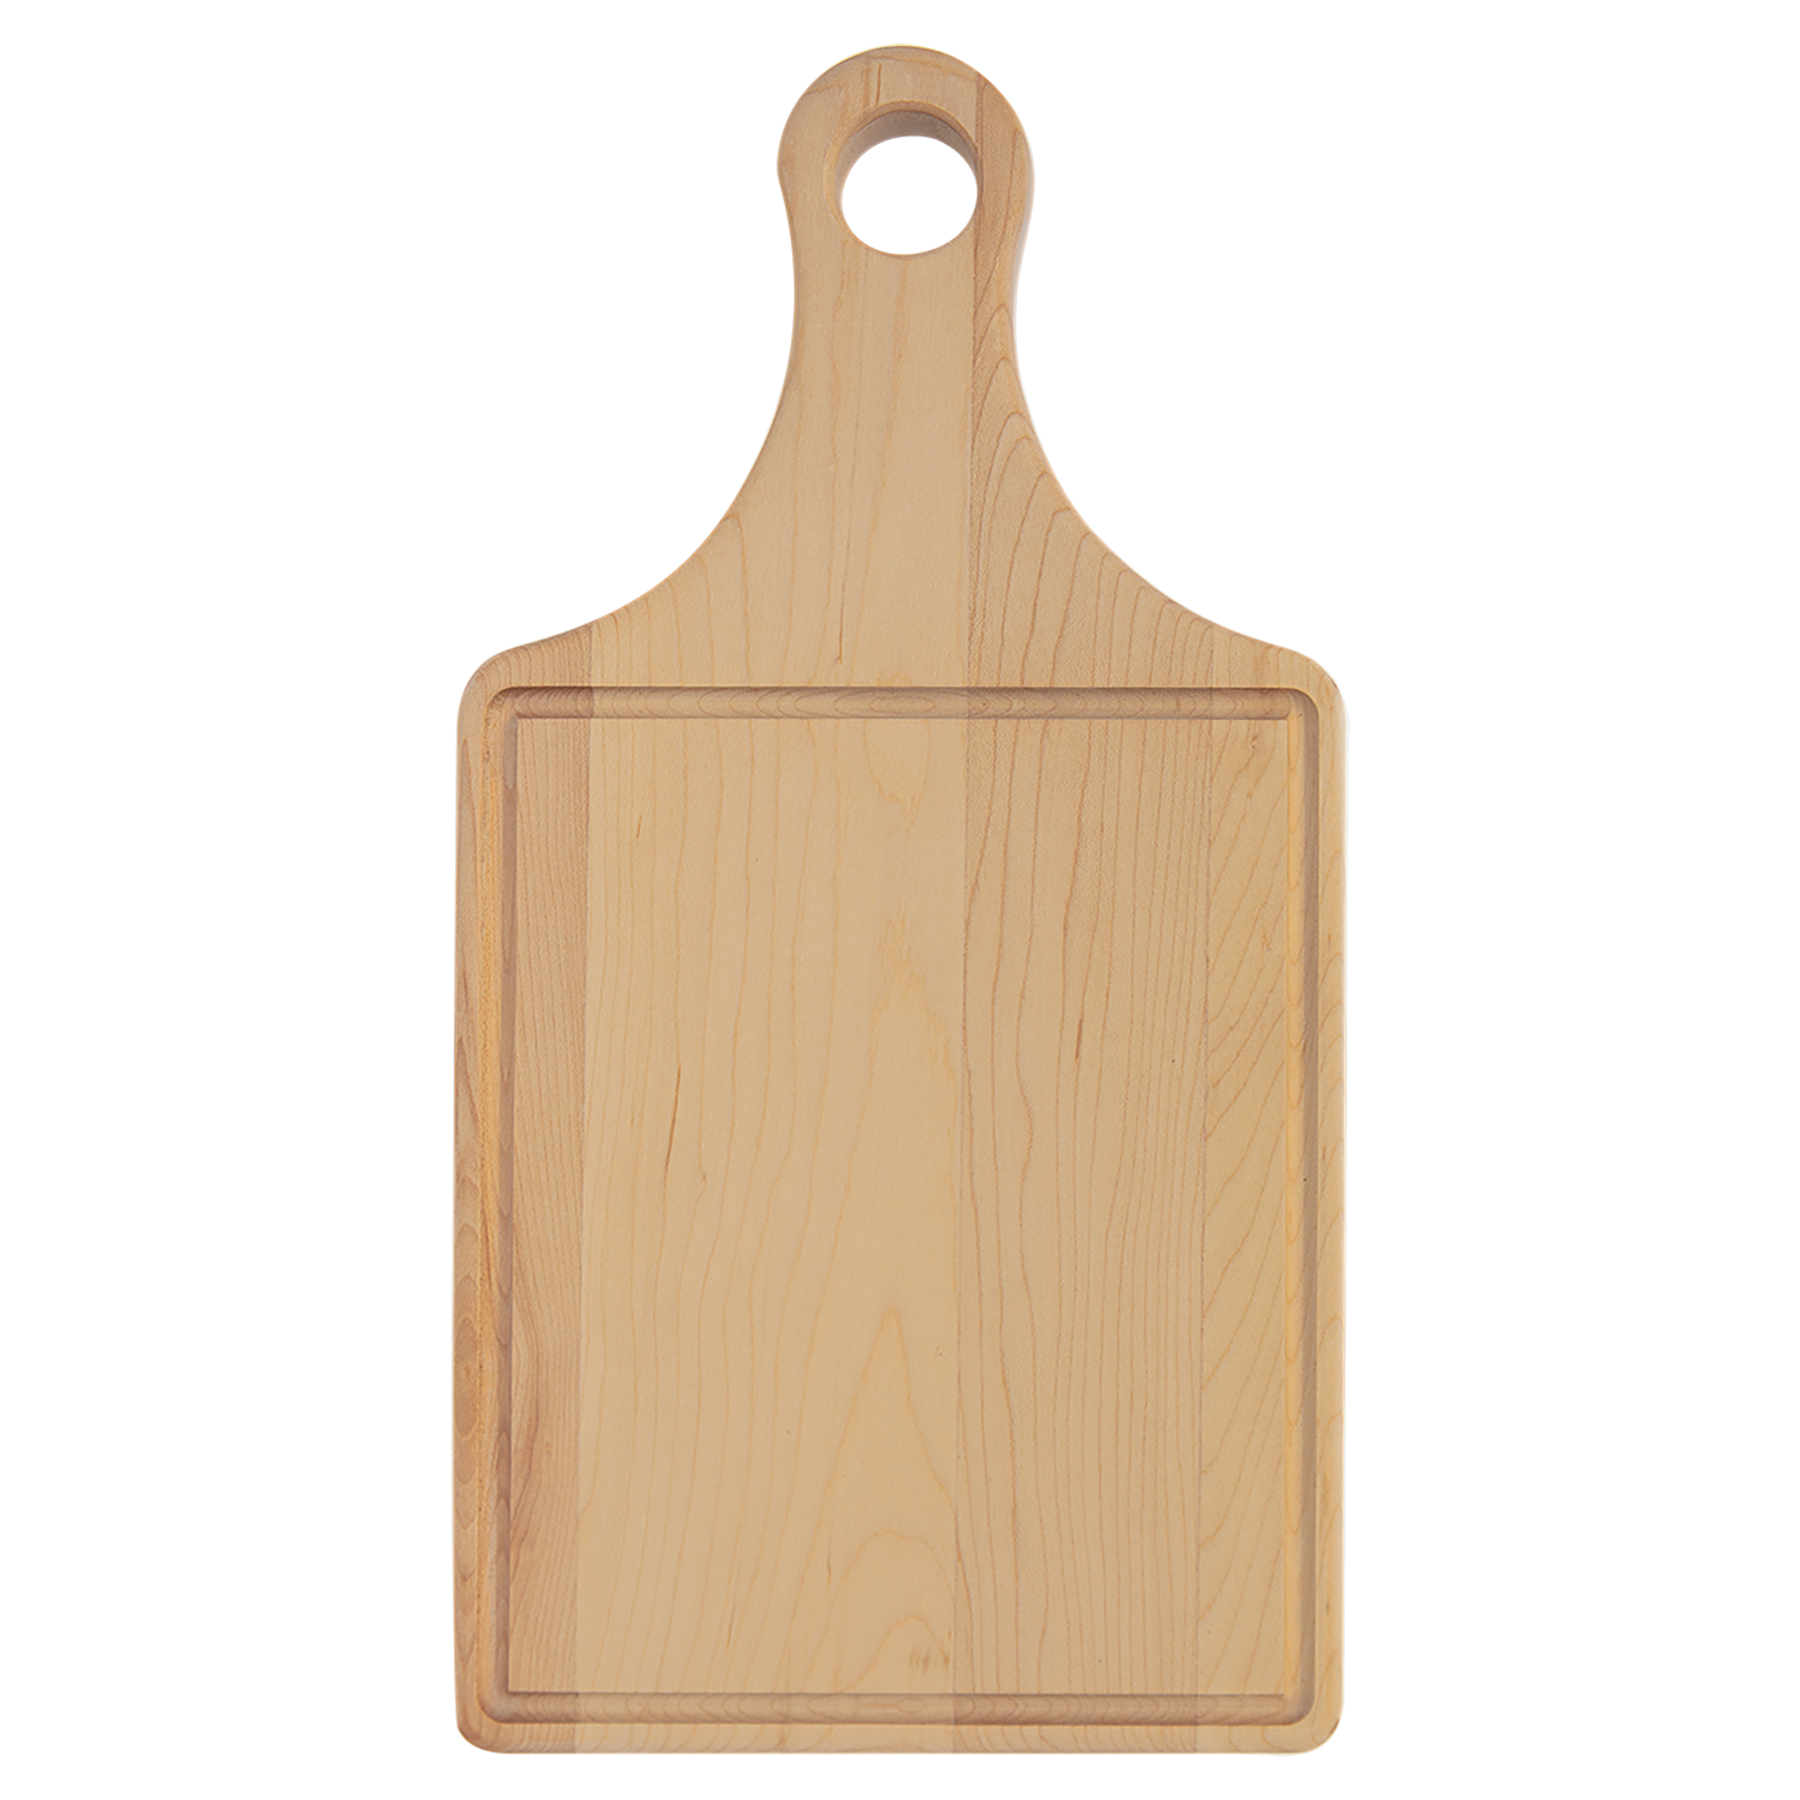 13 1/2" x 7" Maple Cutting Board Paddle Shape with Drip Ring